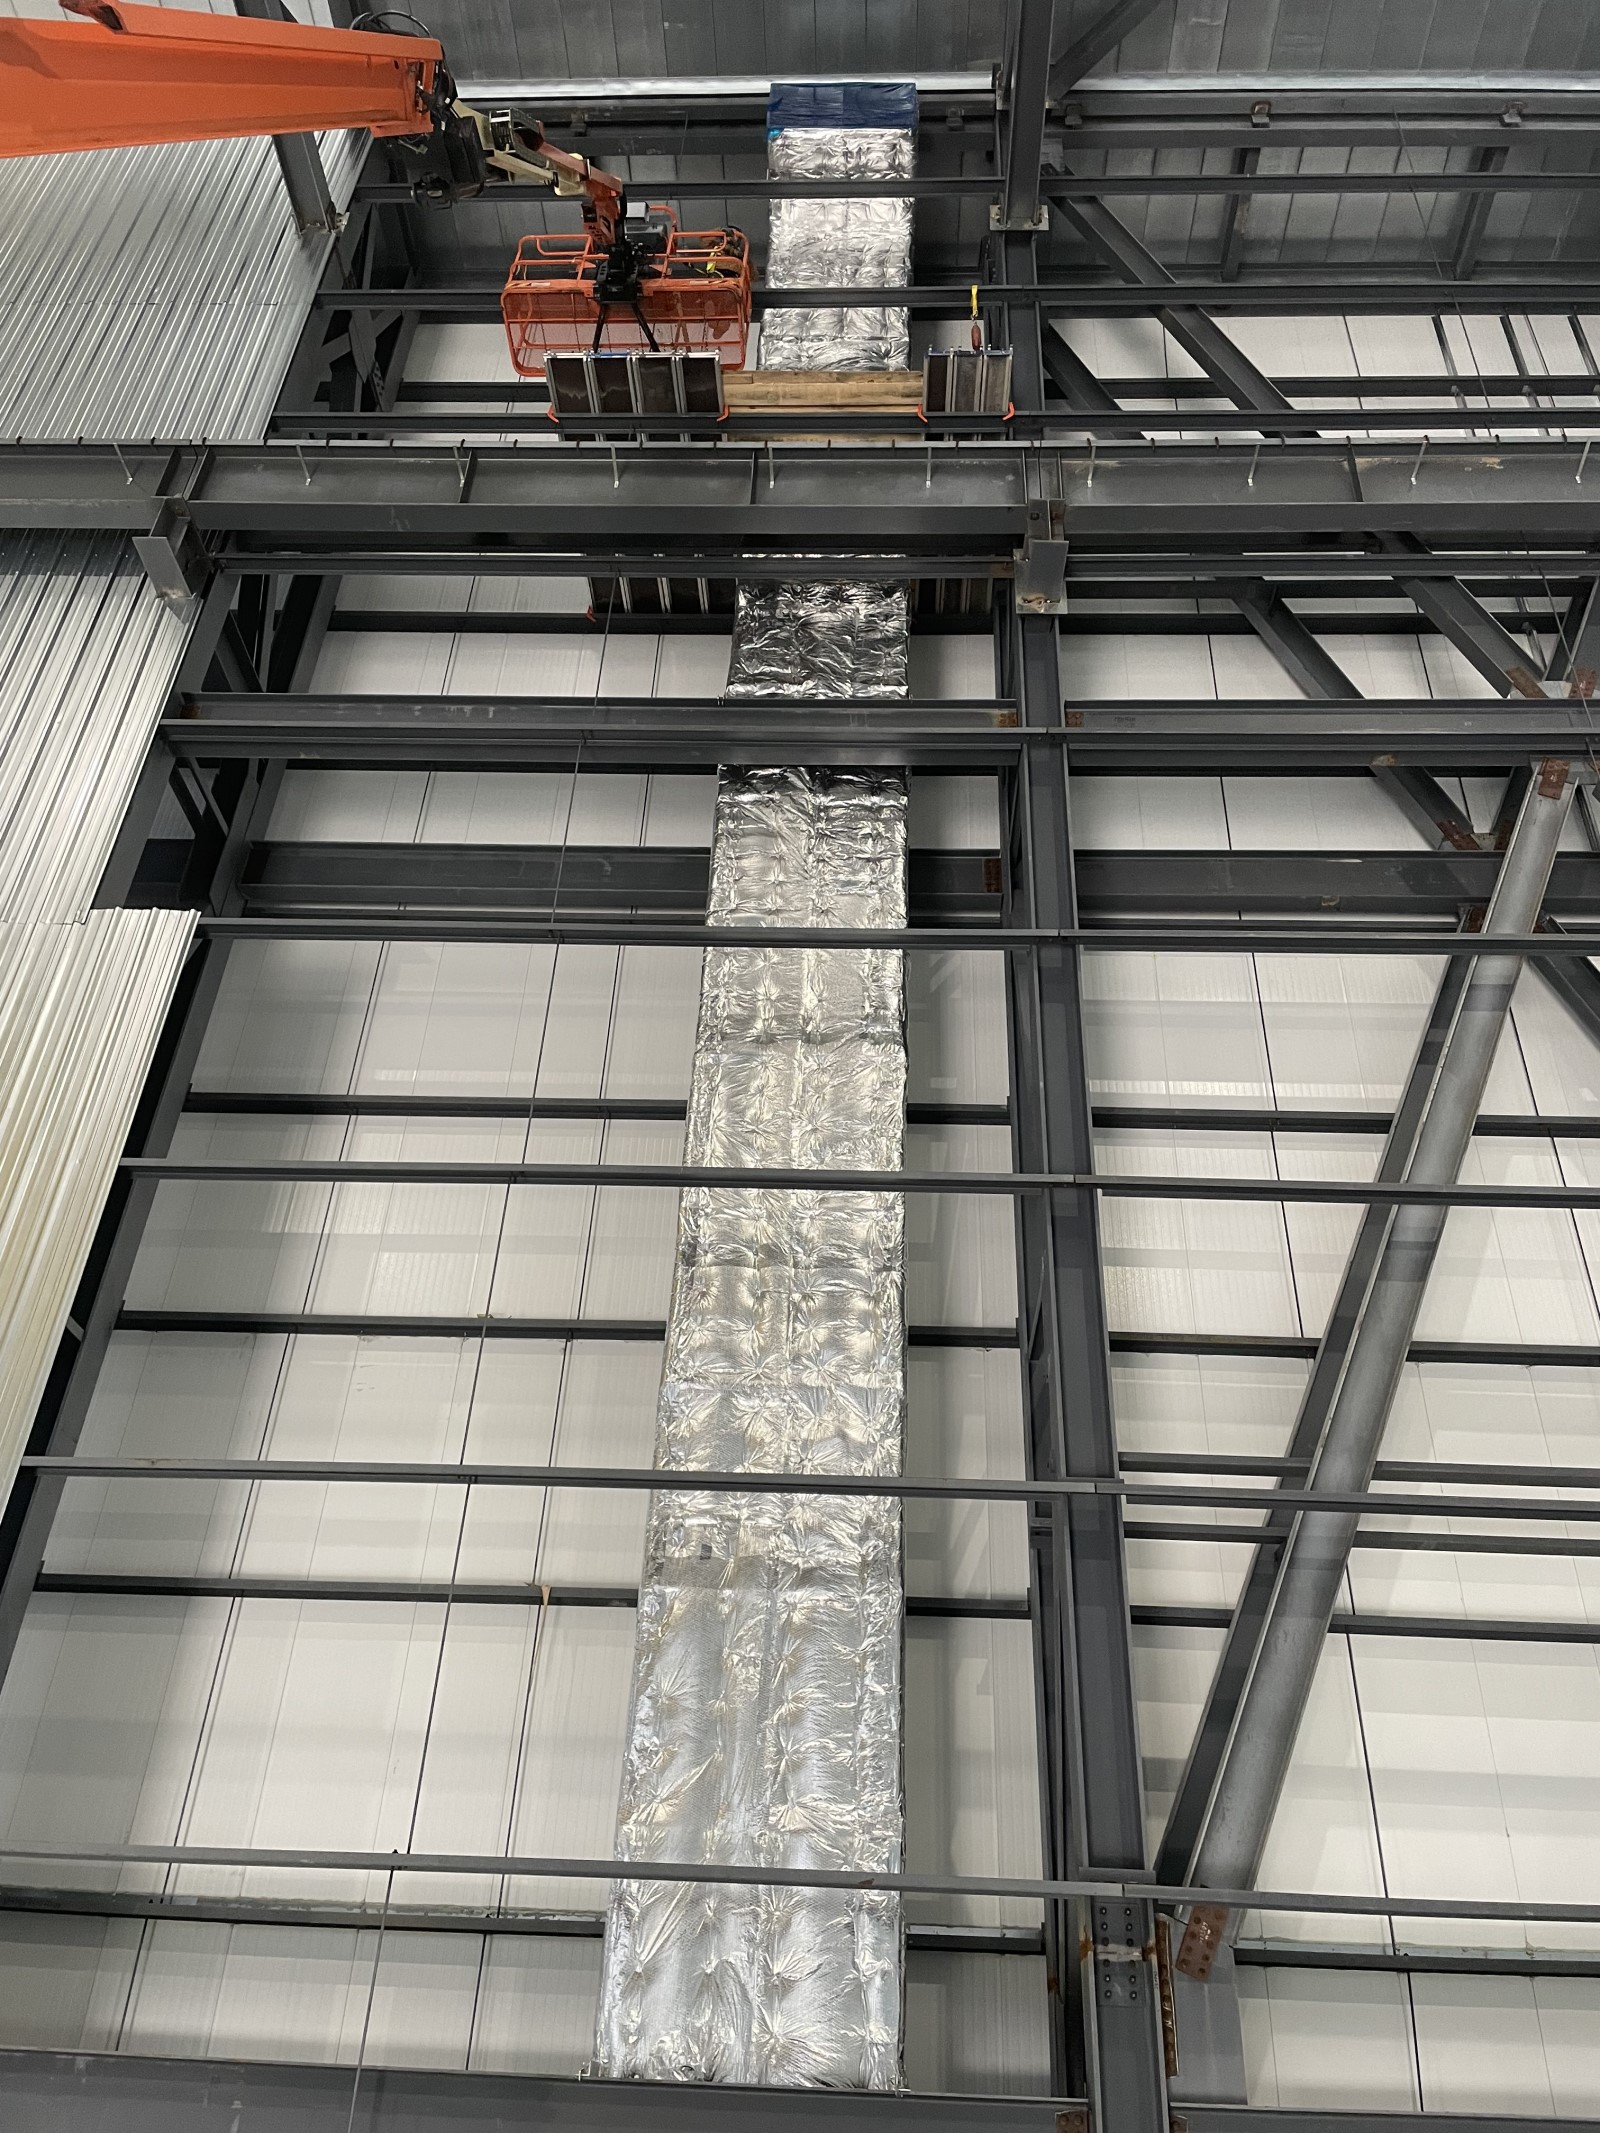 Custom scaffolding solution allows worker to insulate industrial ductwork 150-ft-tall